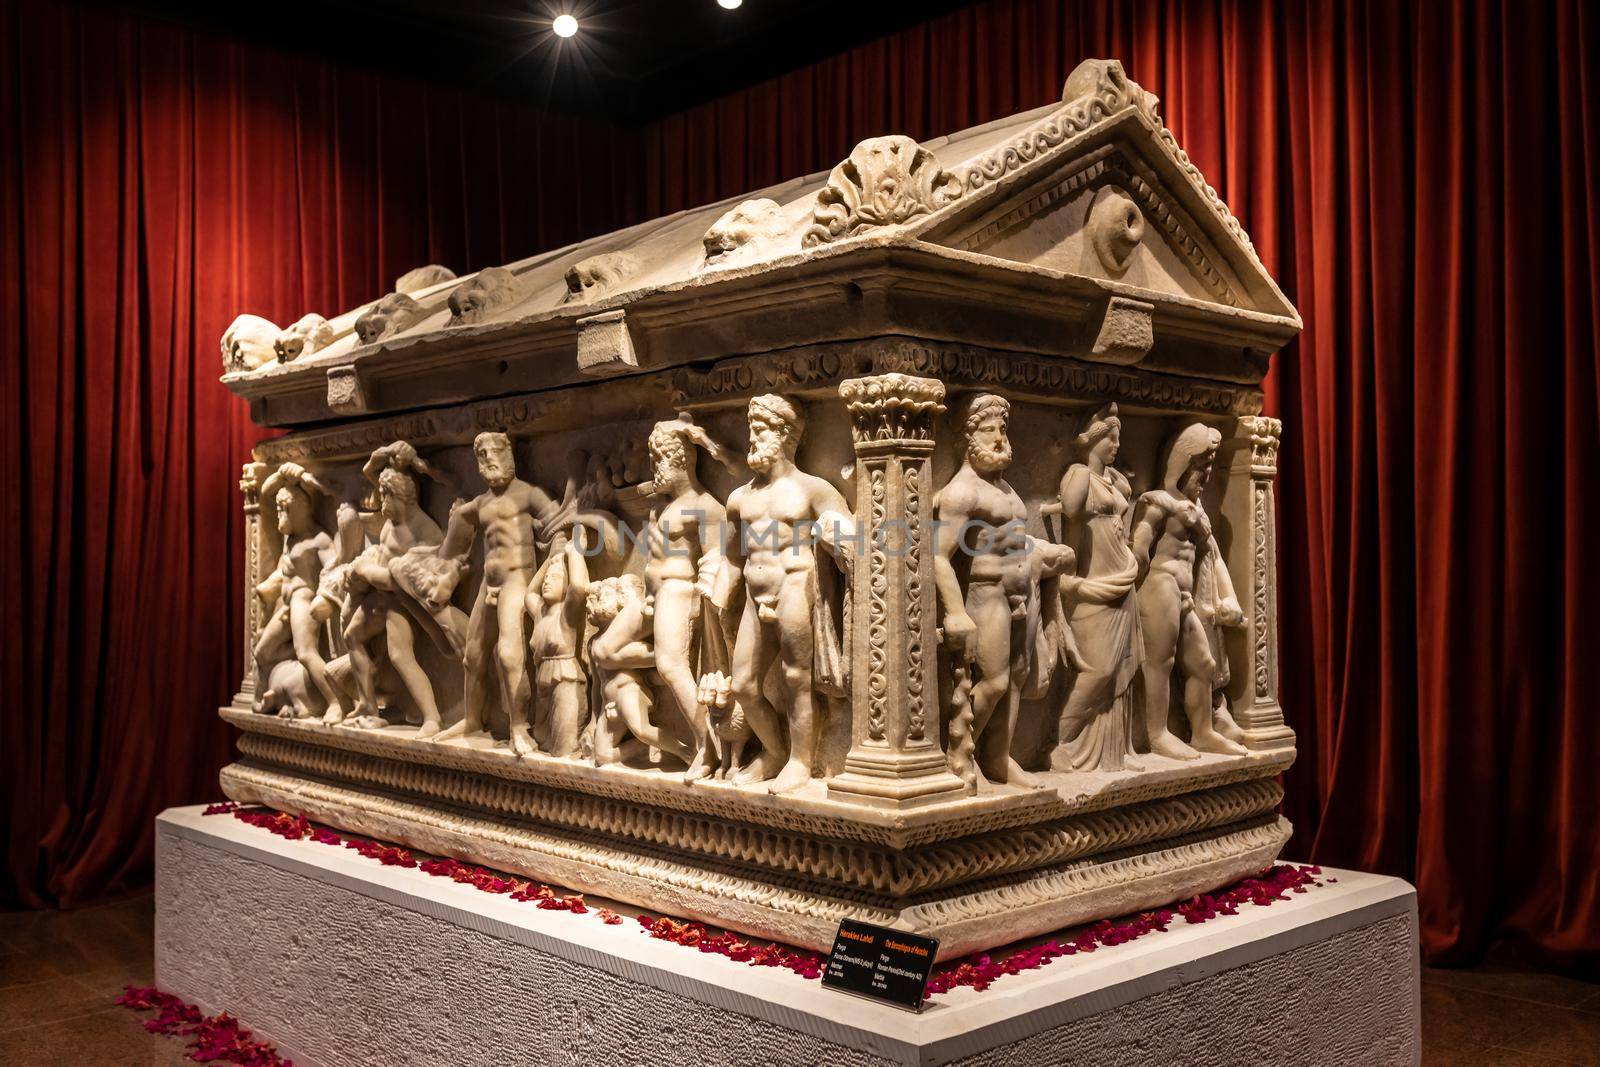 The Heracles Sarcophagus by Sonat